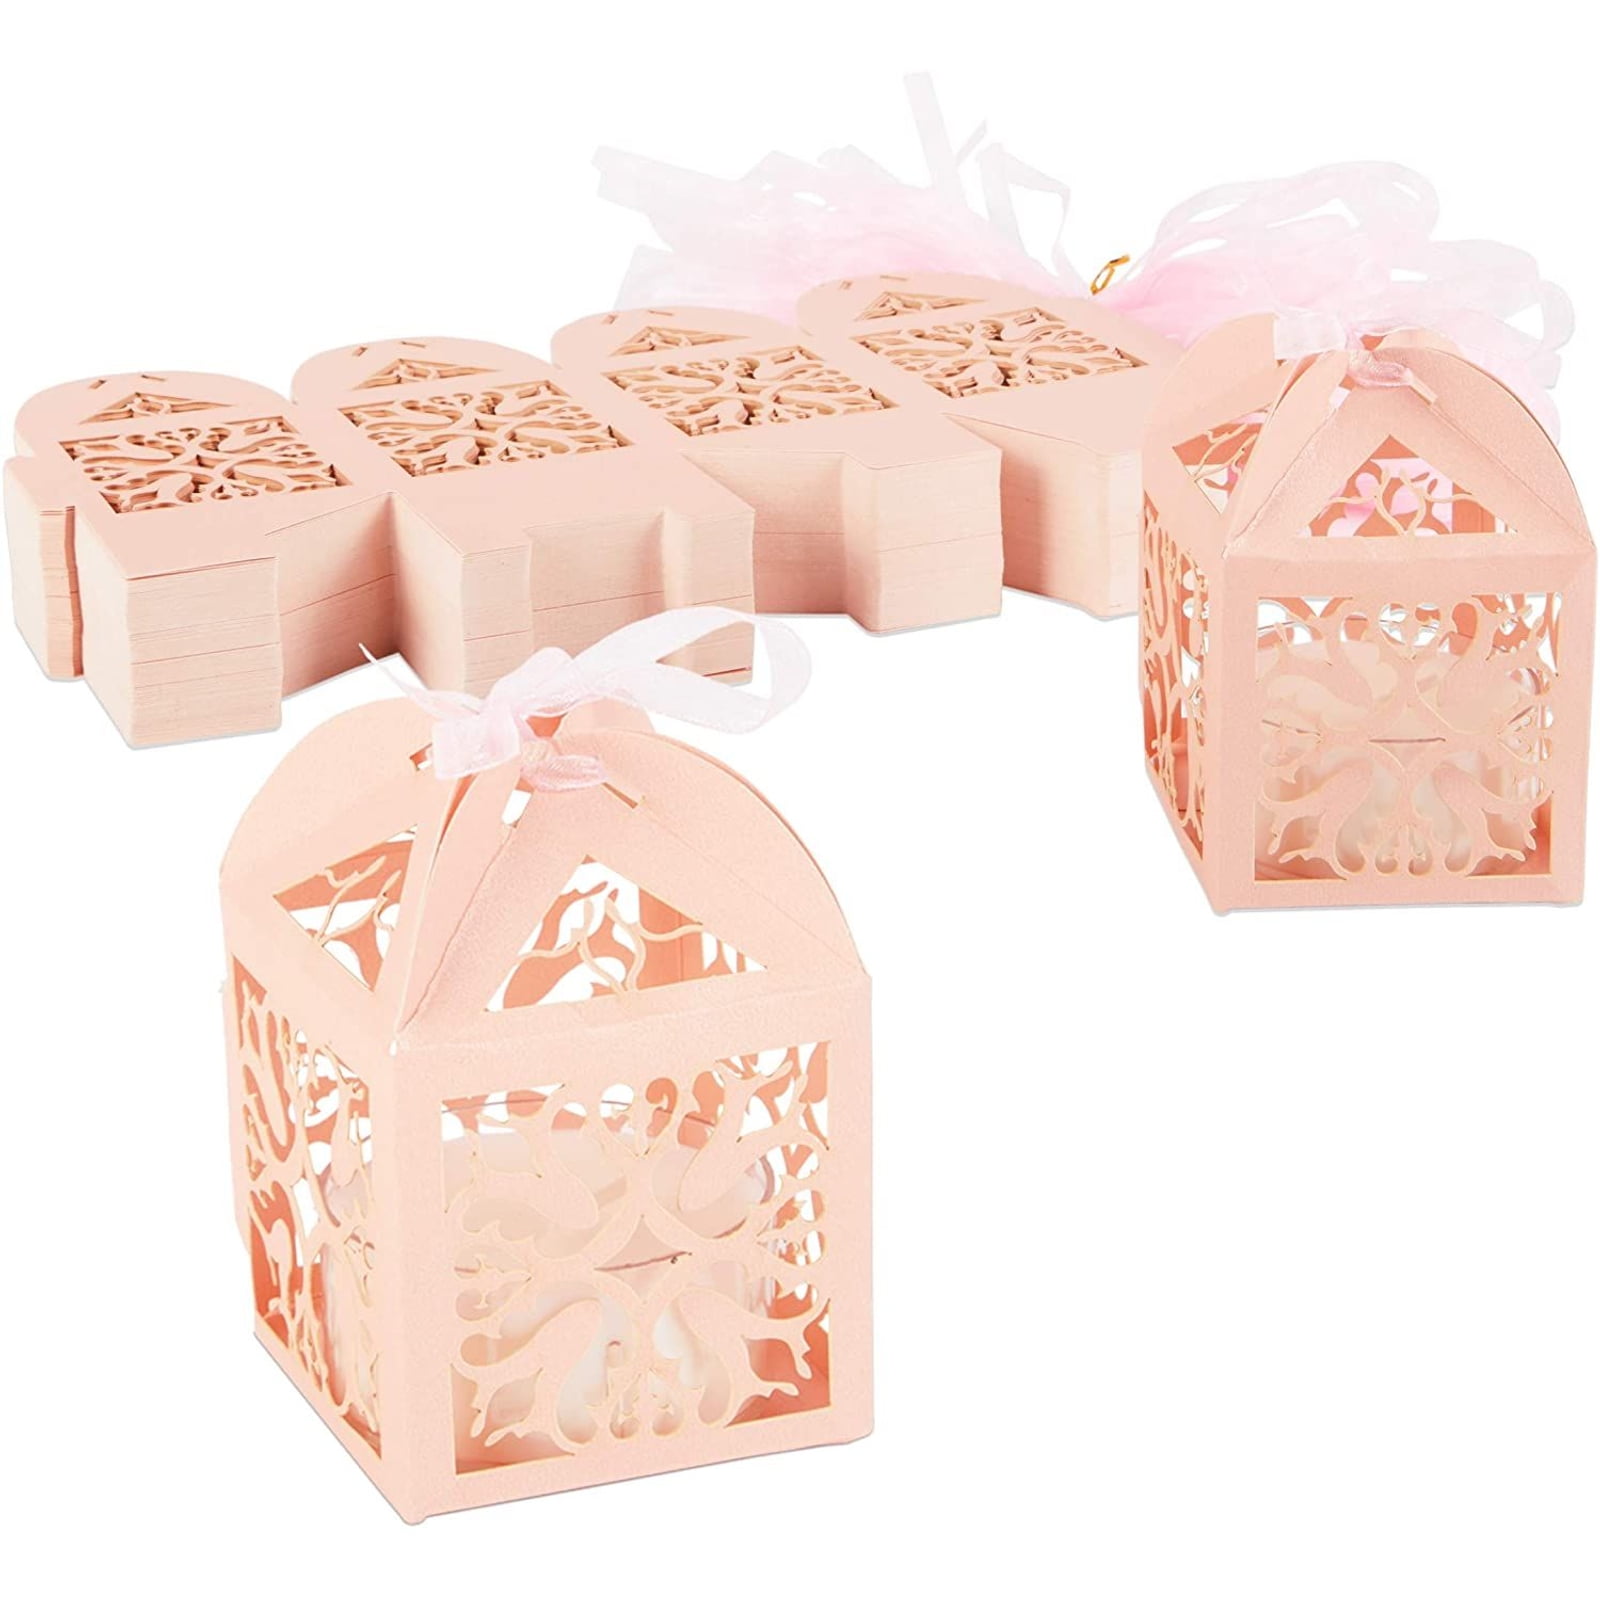 25-100Pcs New Laser Cut Candy Chocolate Gift Wedding Party Favour Boxes Ribbons 